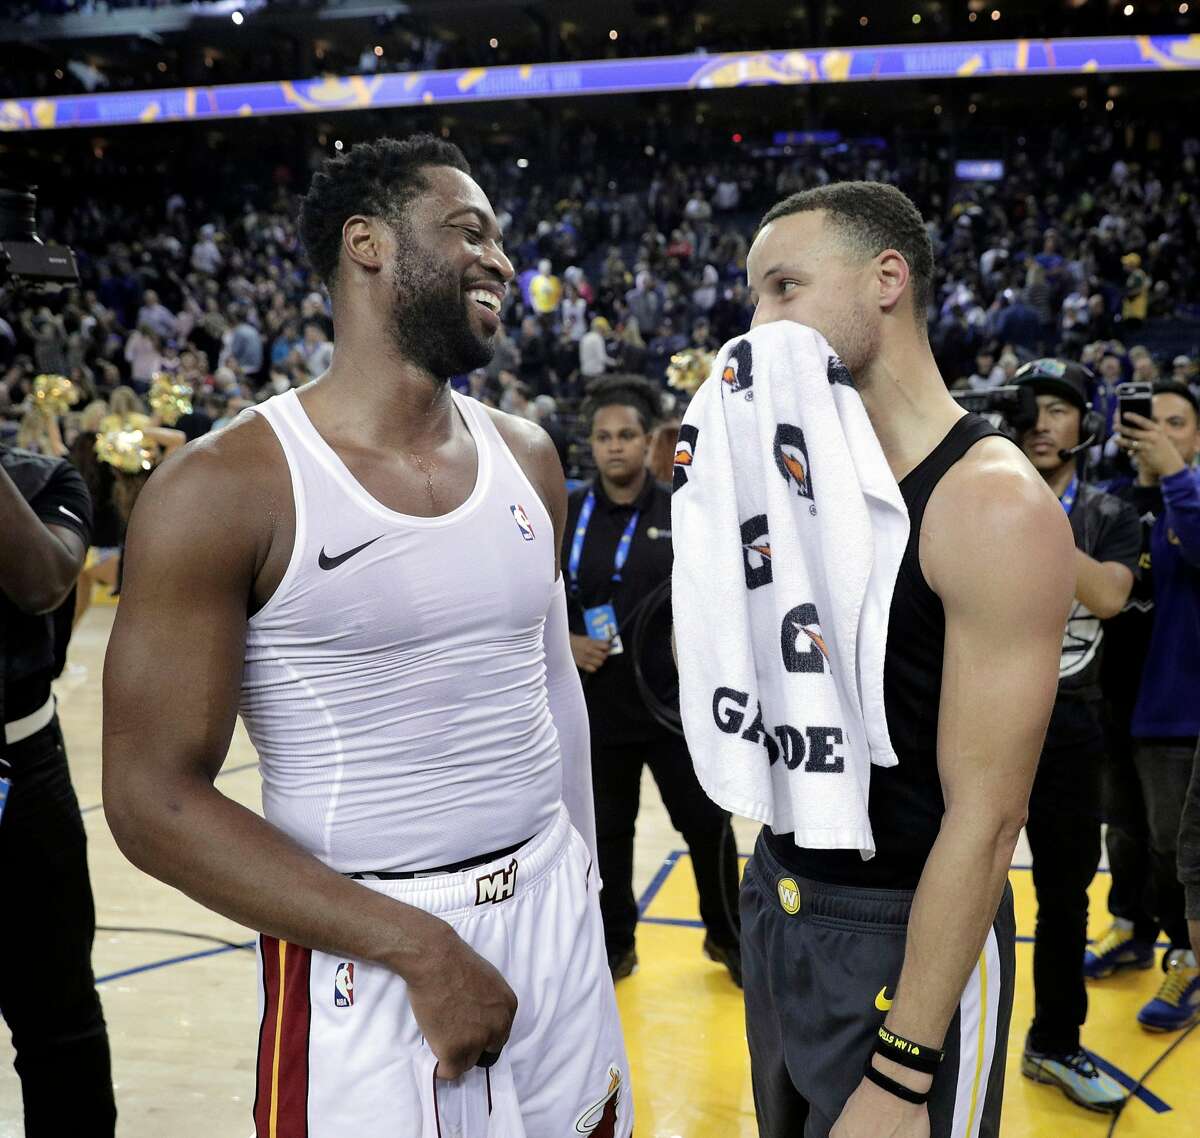 Dwayne Wade Swapped Jerseys With NBA Legends as His Final Season